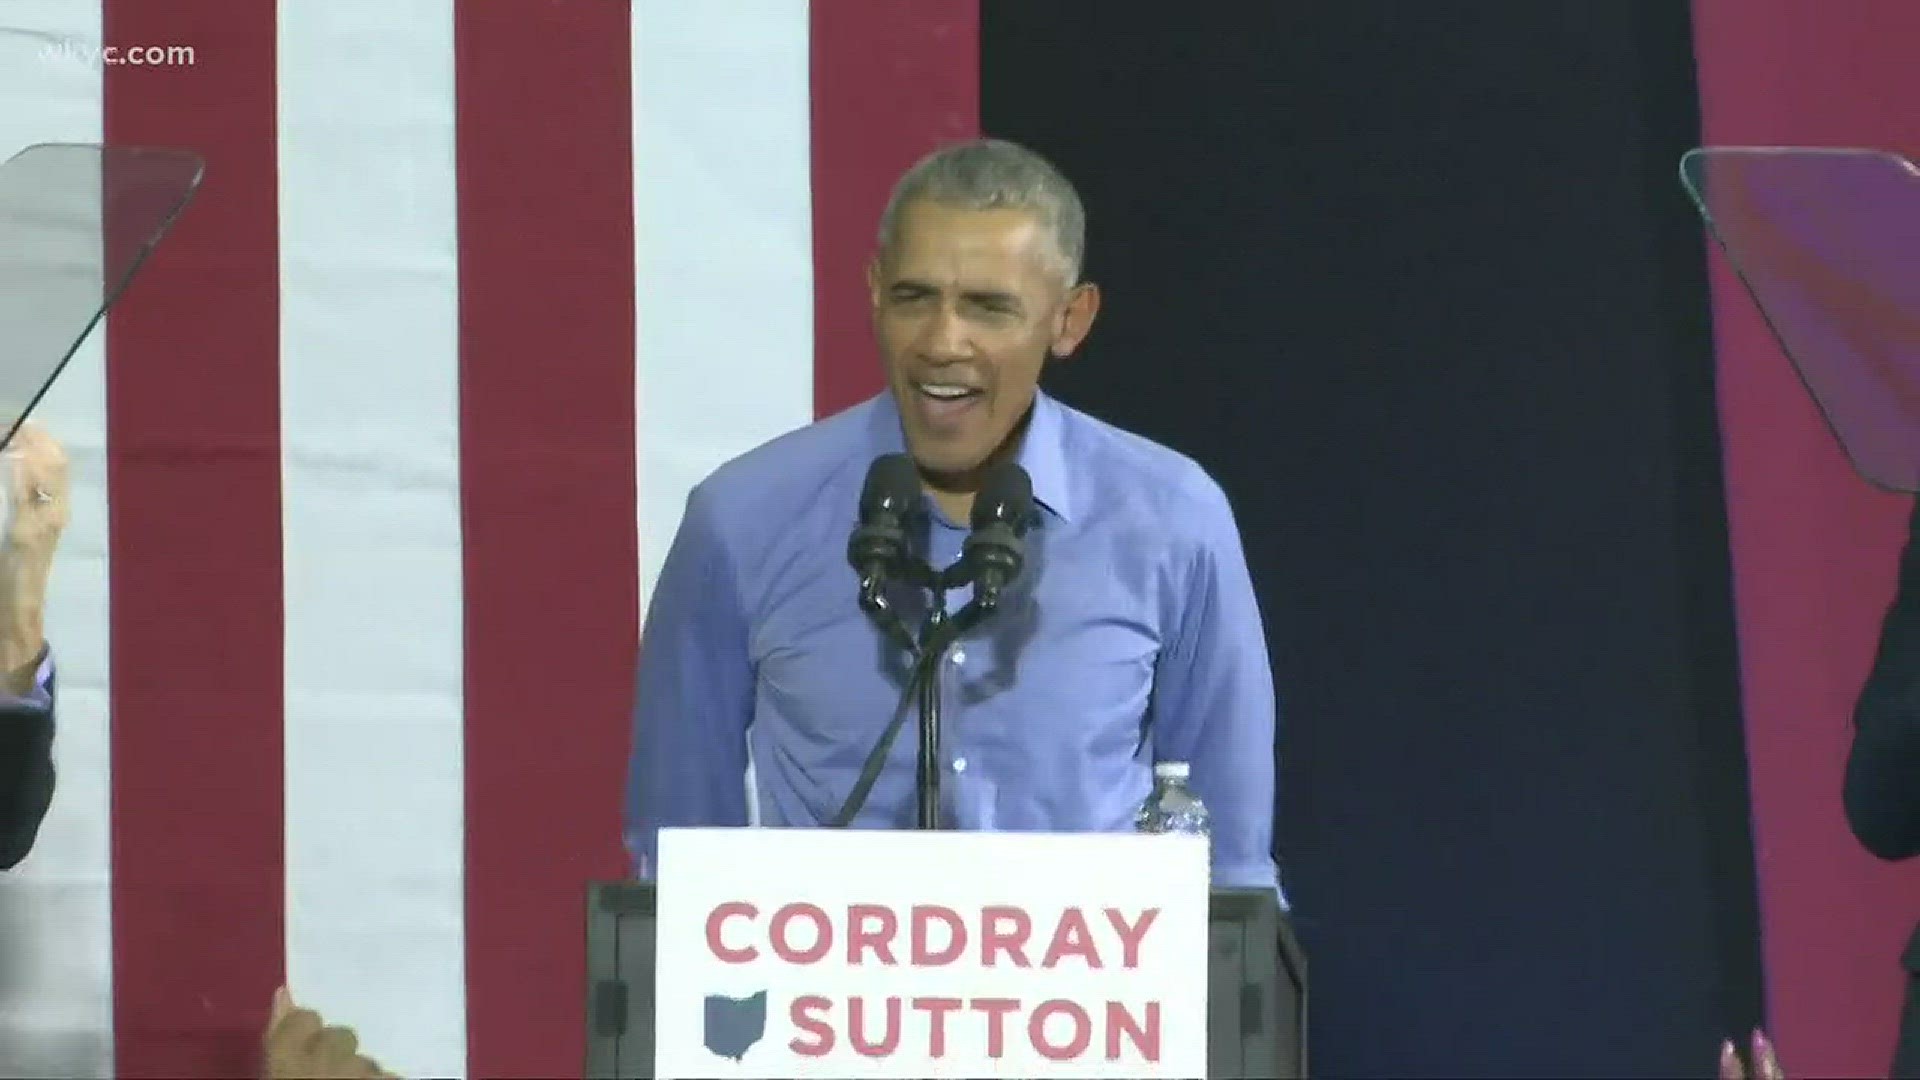 Former President Barack Obama campaigns for Richard Cordray in Cleveland